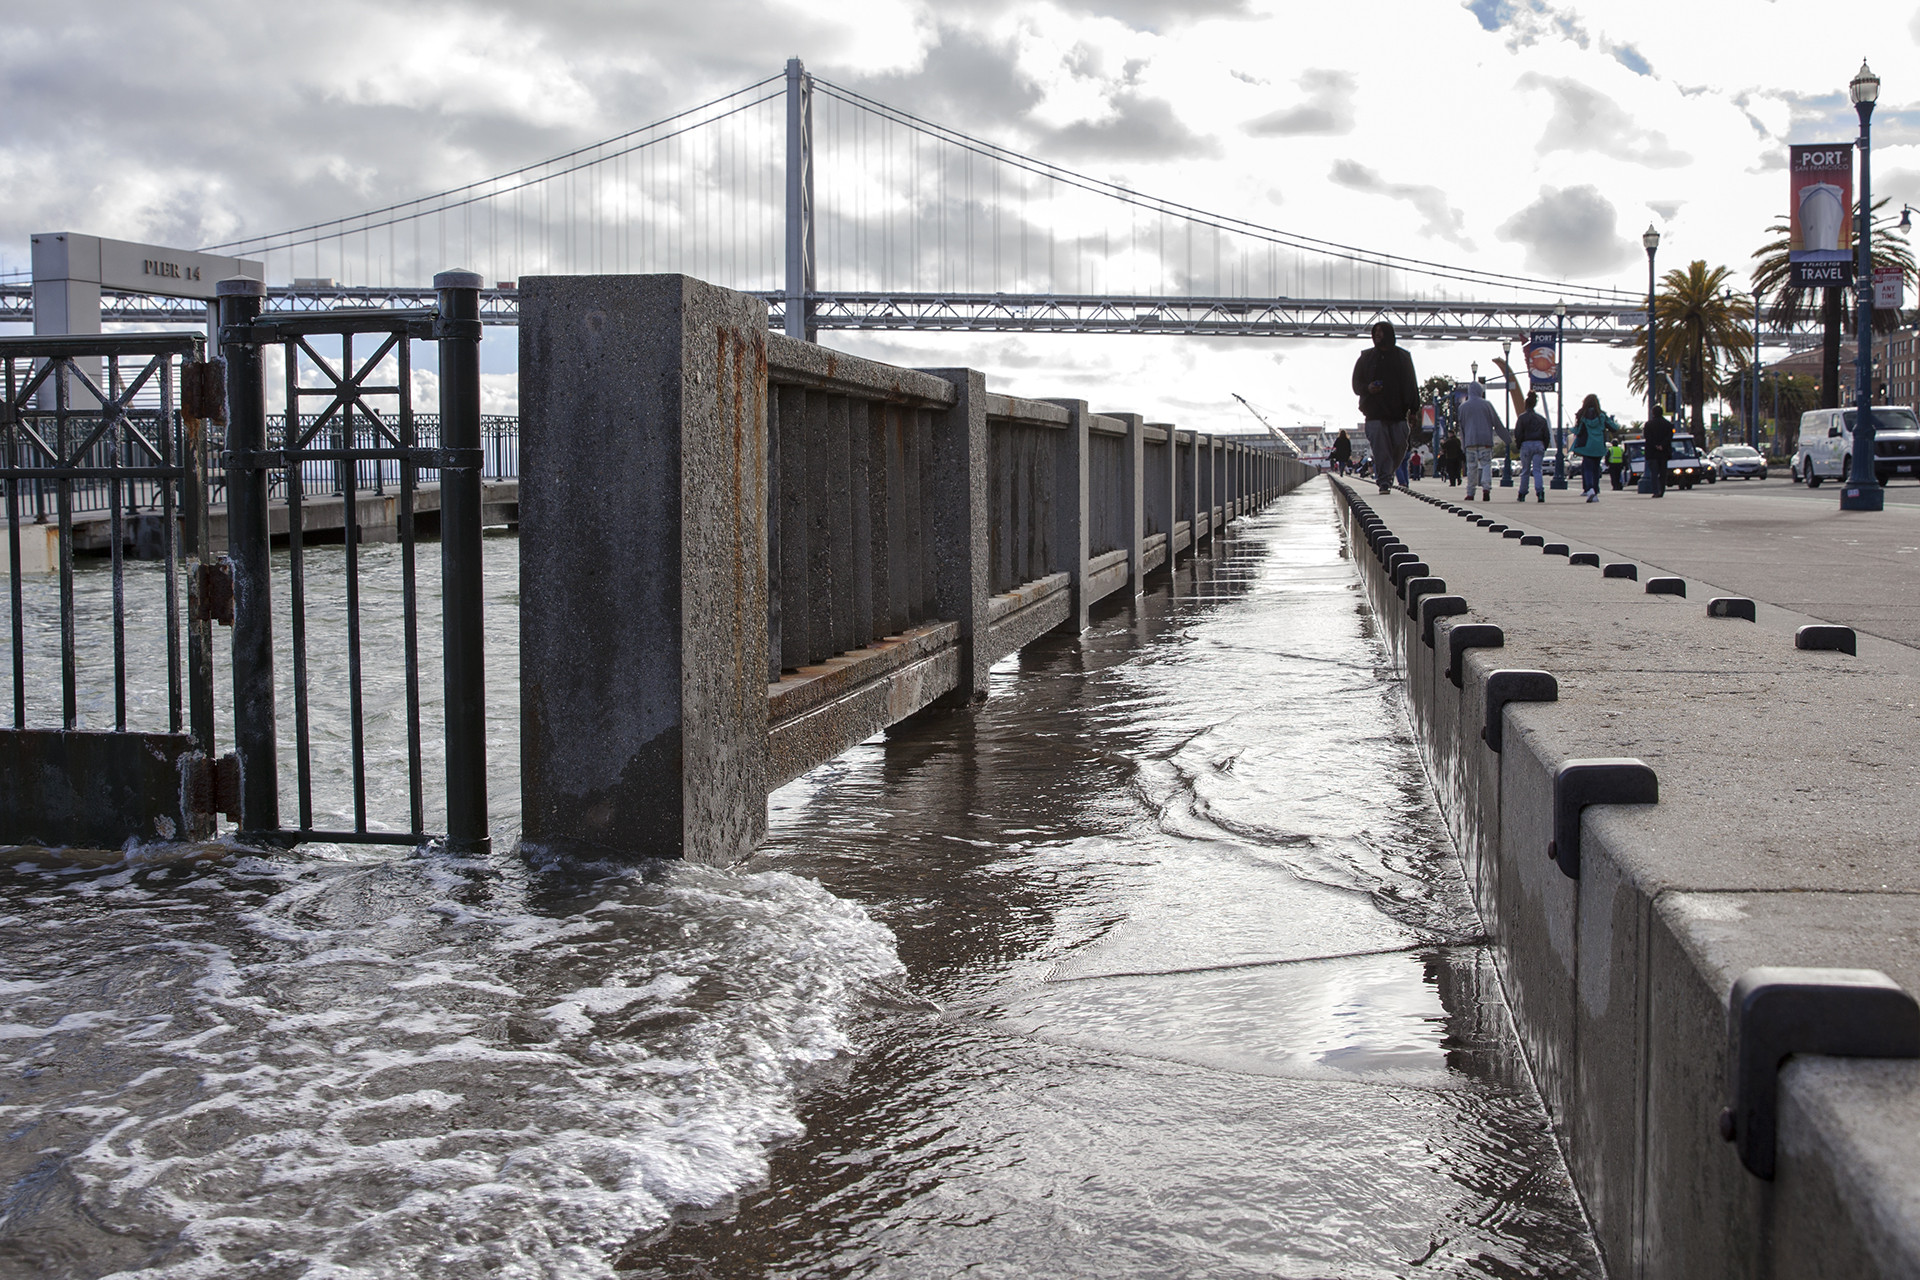 Walkways along Pier 14 at the San Francisco Embarcadero begin to flood during the high point of a king tide on January 11, 2017.